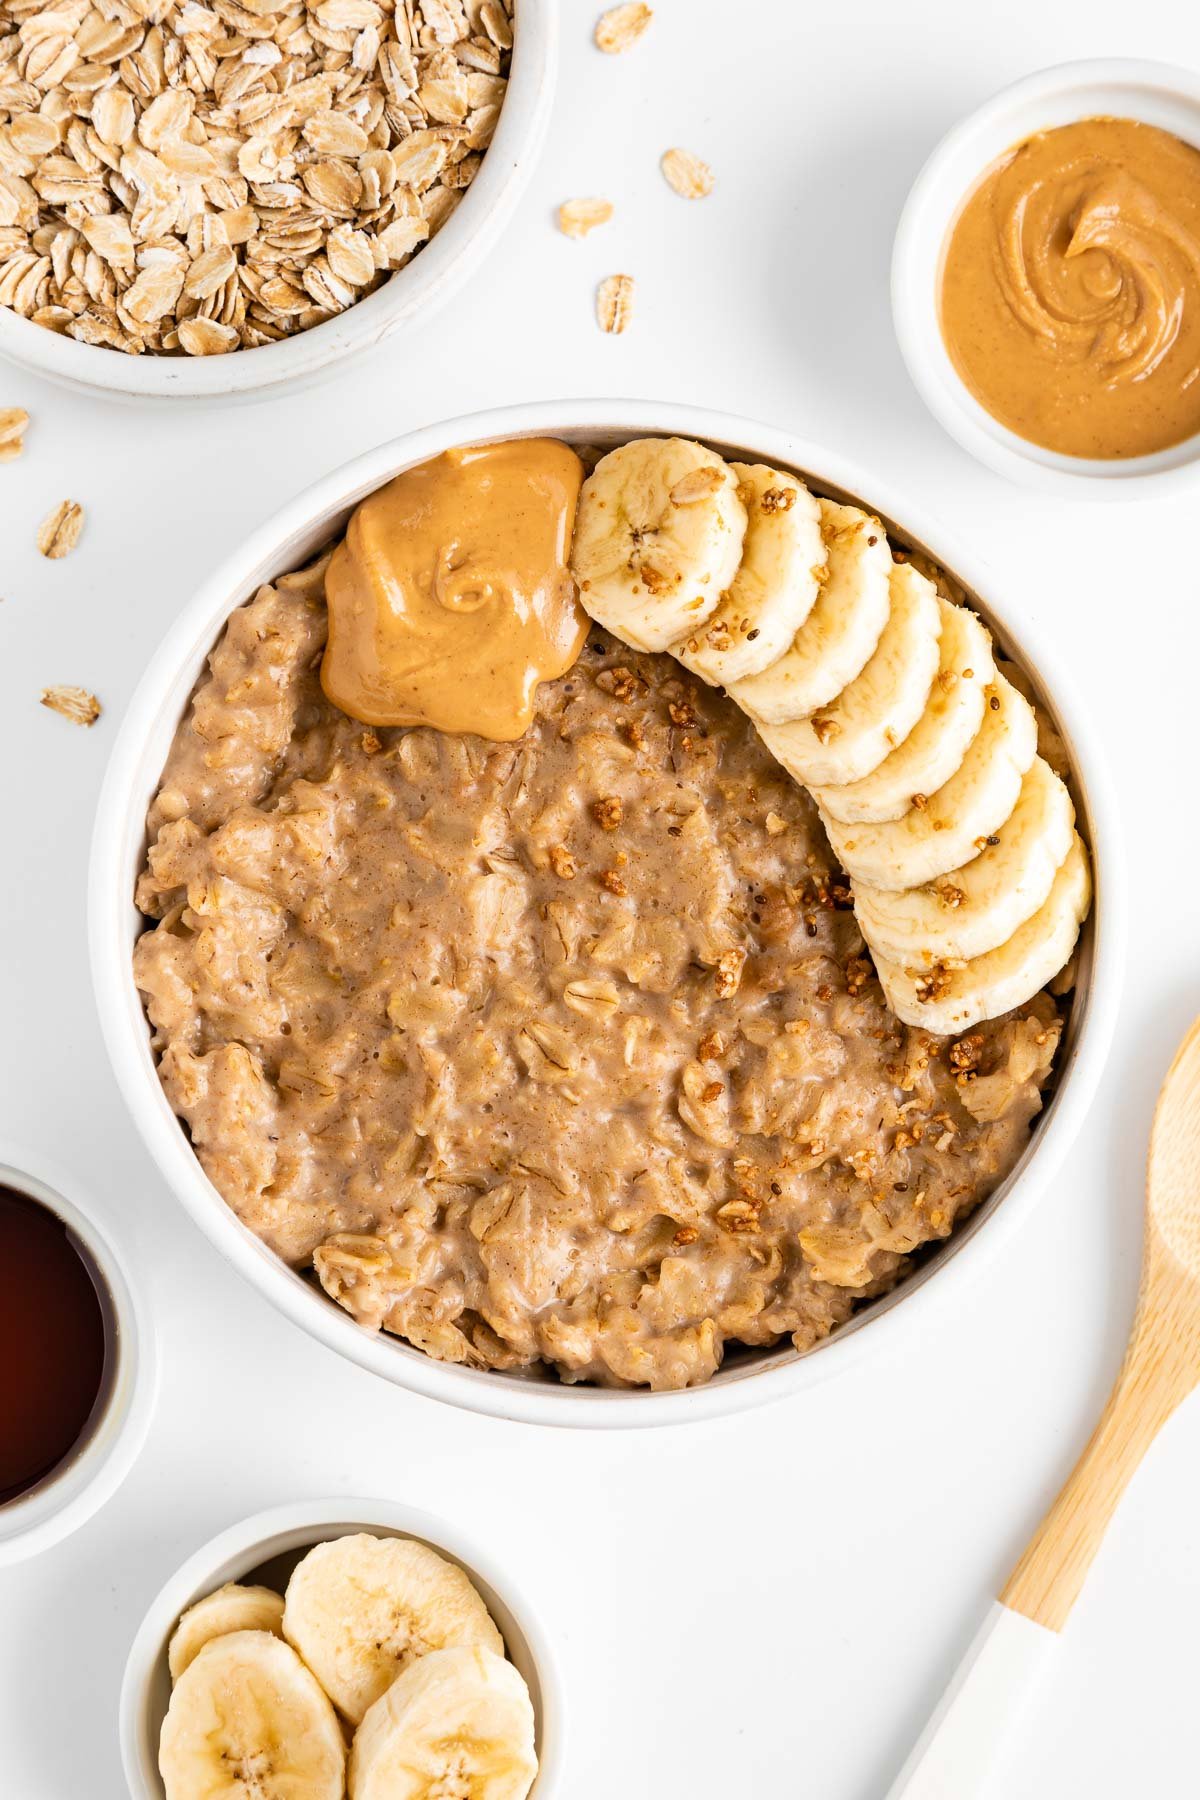 peanut butter oatmeal in a white bowl surrounded by a bowl of maple syrup, a bowl of oats, a bowl of nut butter, and a ceramic mug filled with almond milk